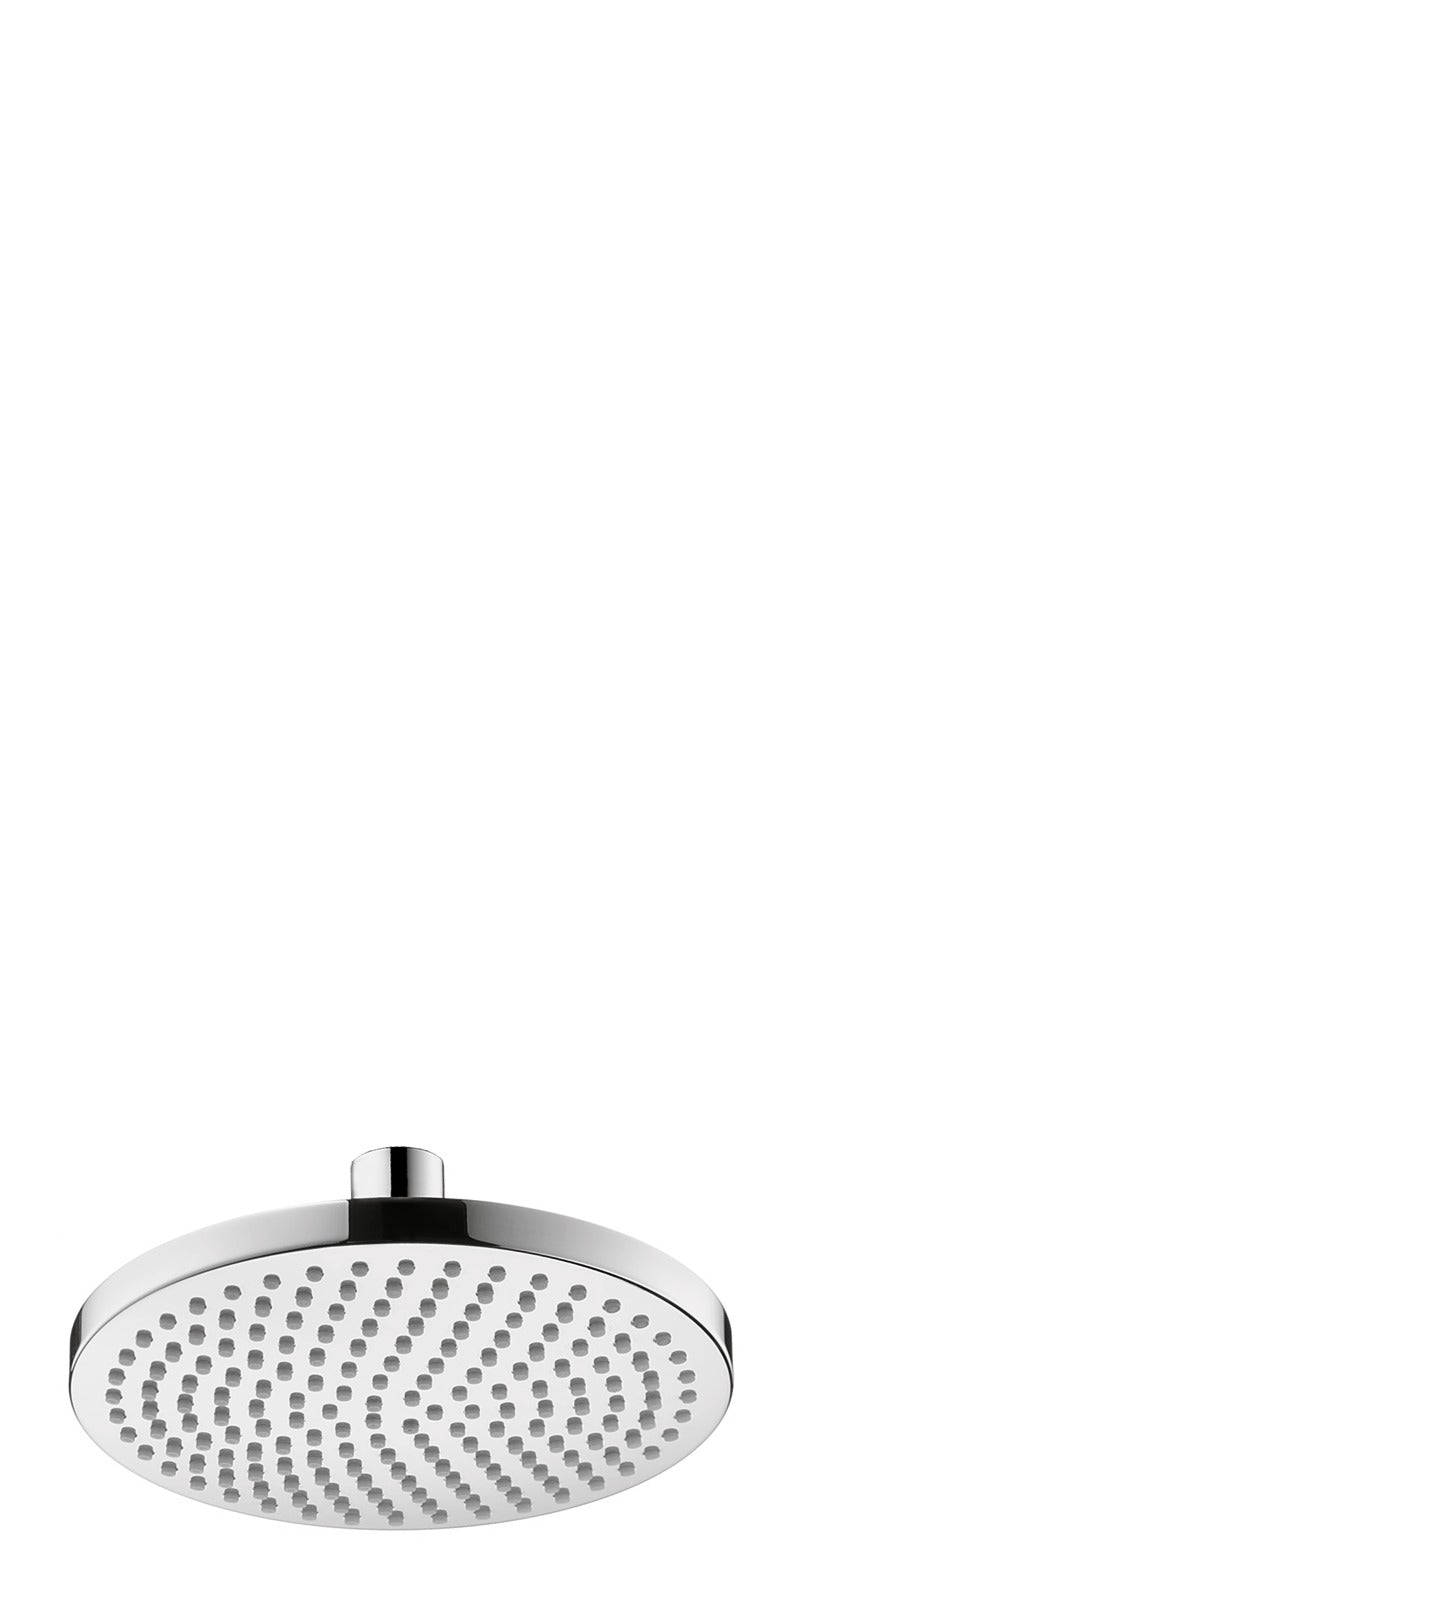 HANSGROHE 28450001 Croma Showerhead 160 1-Jet, 2.0 GPM in Chrome